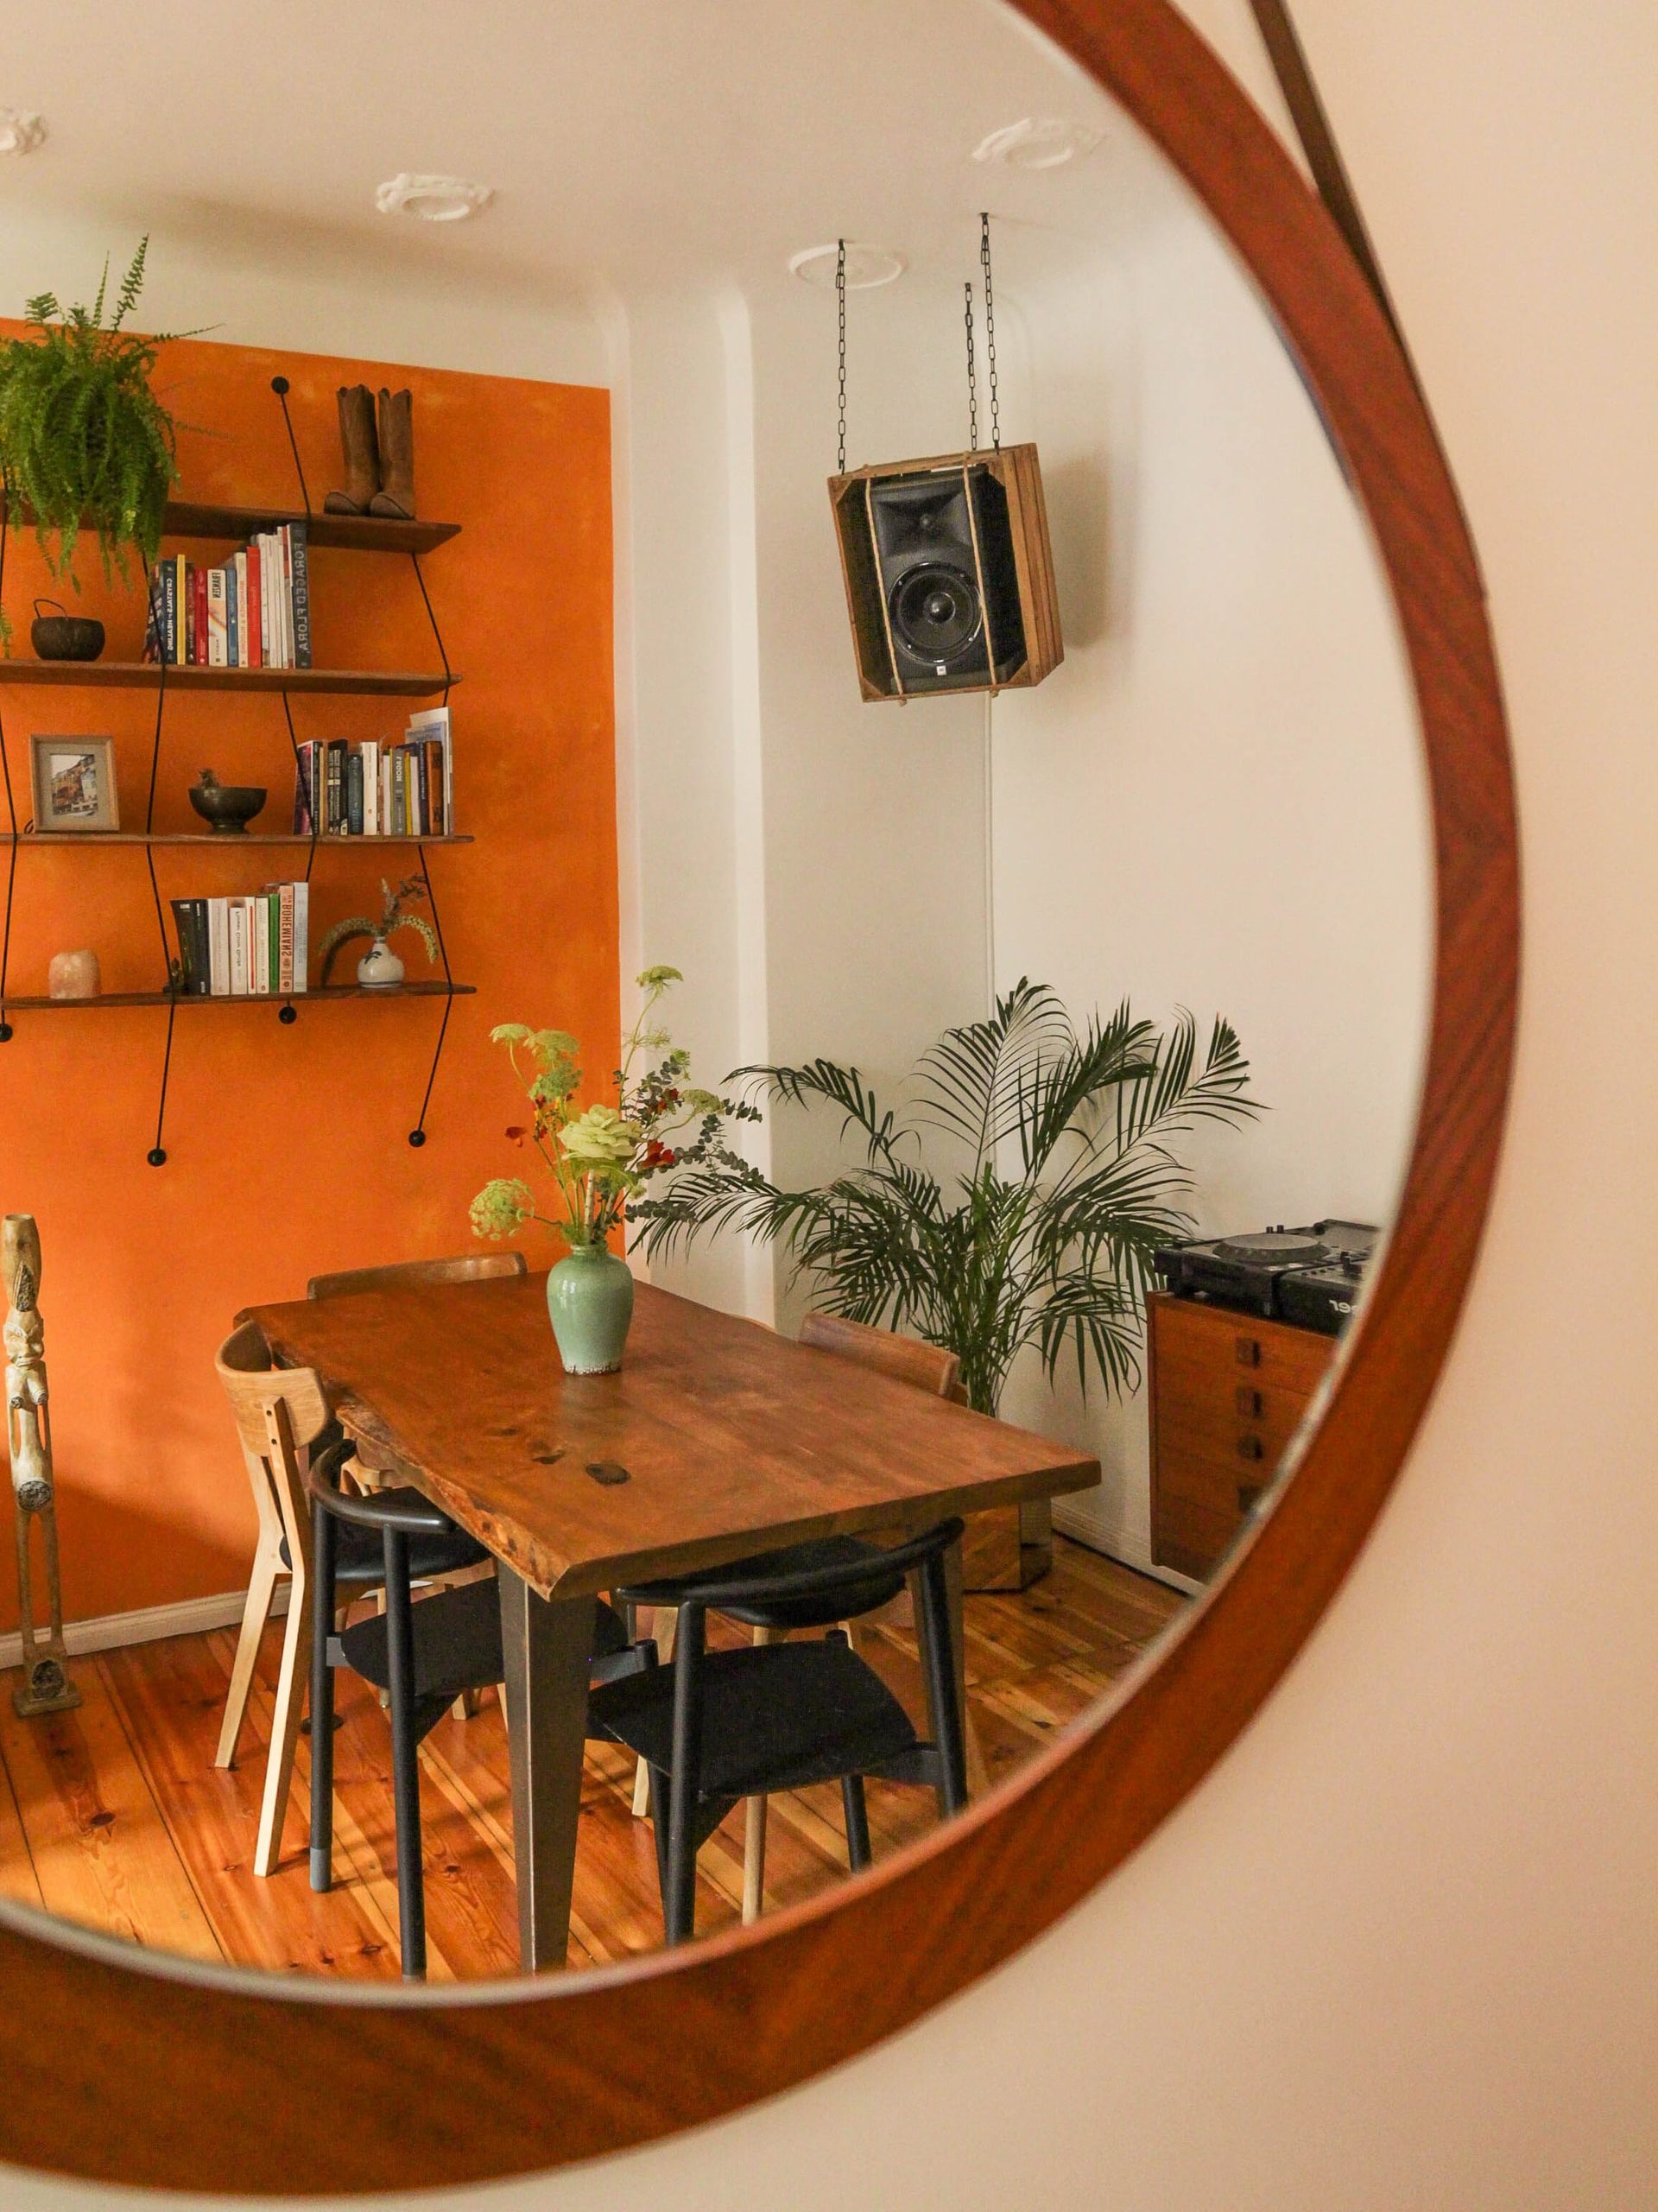 A dining room being shown through a mirror with an orange accent wall